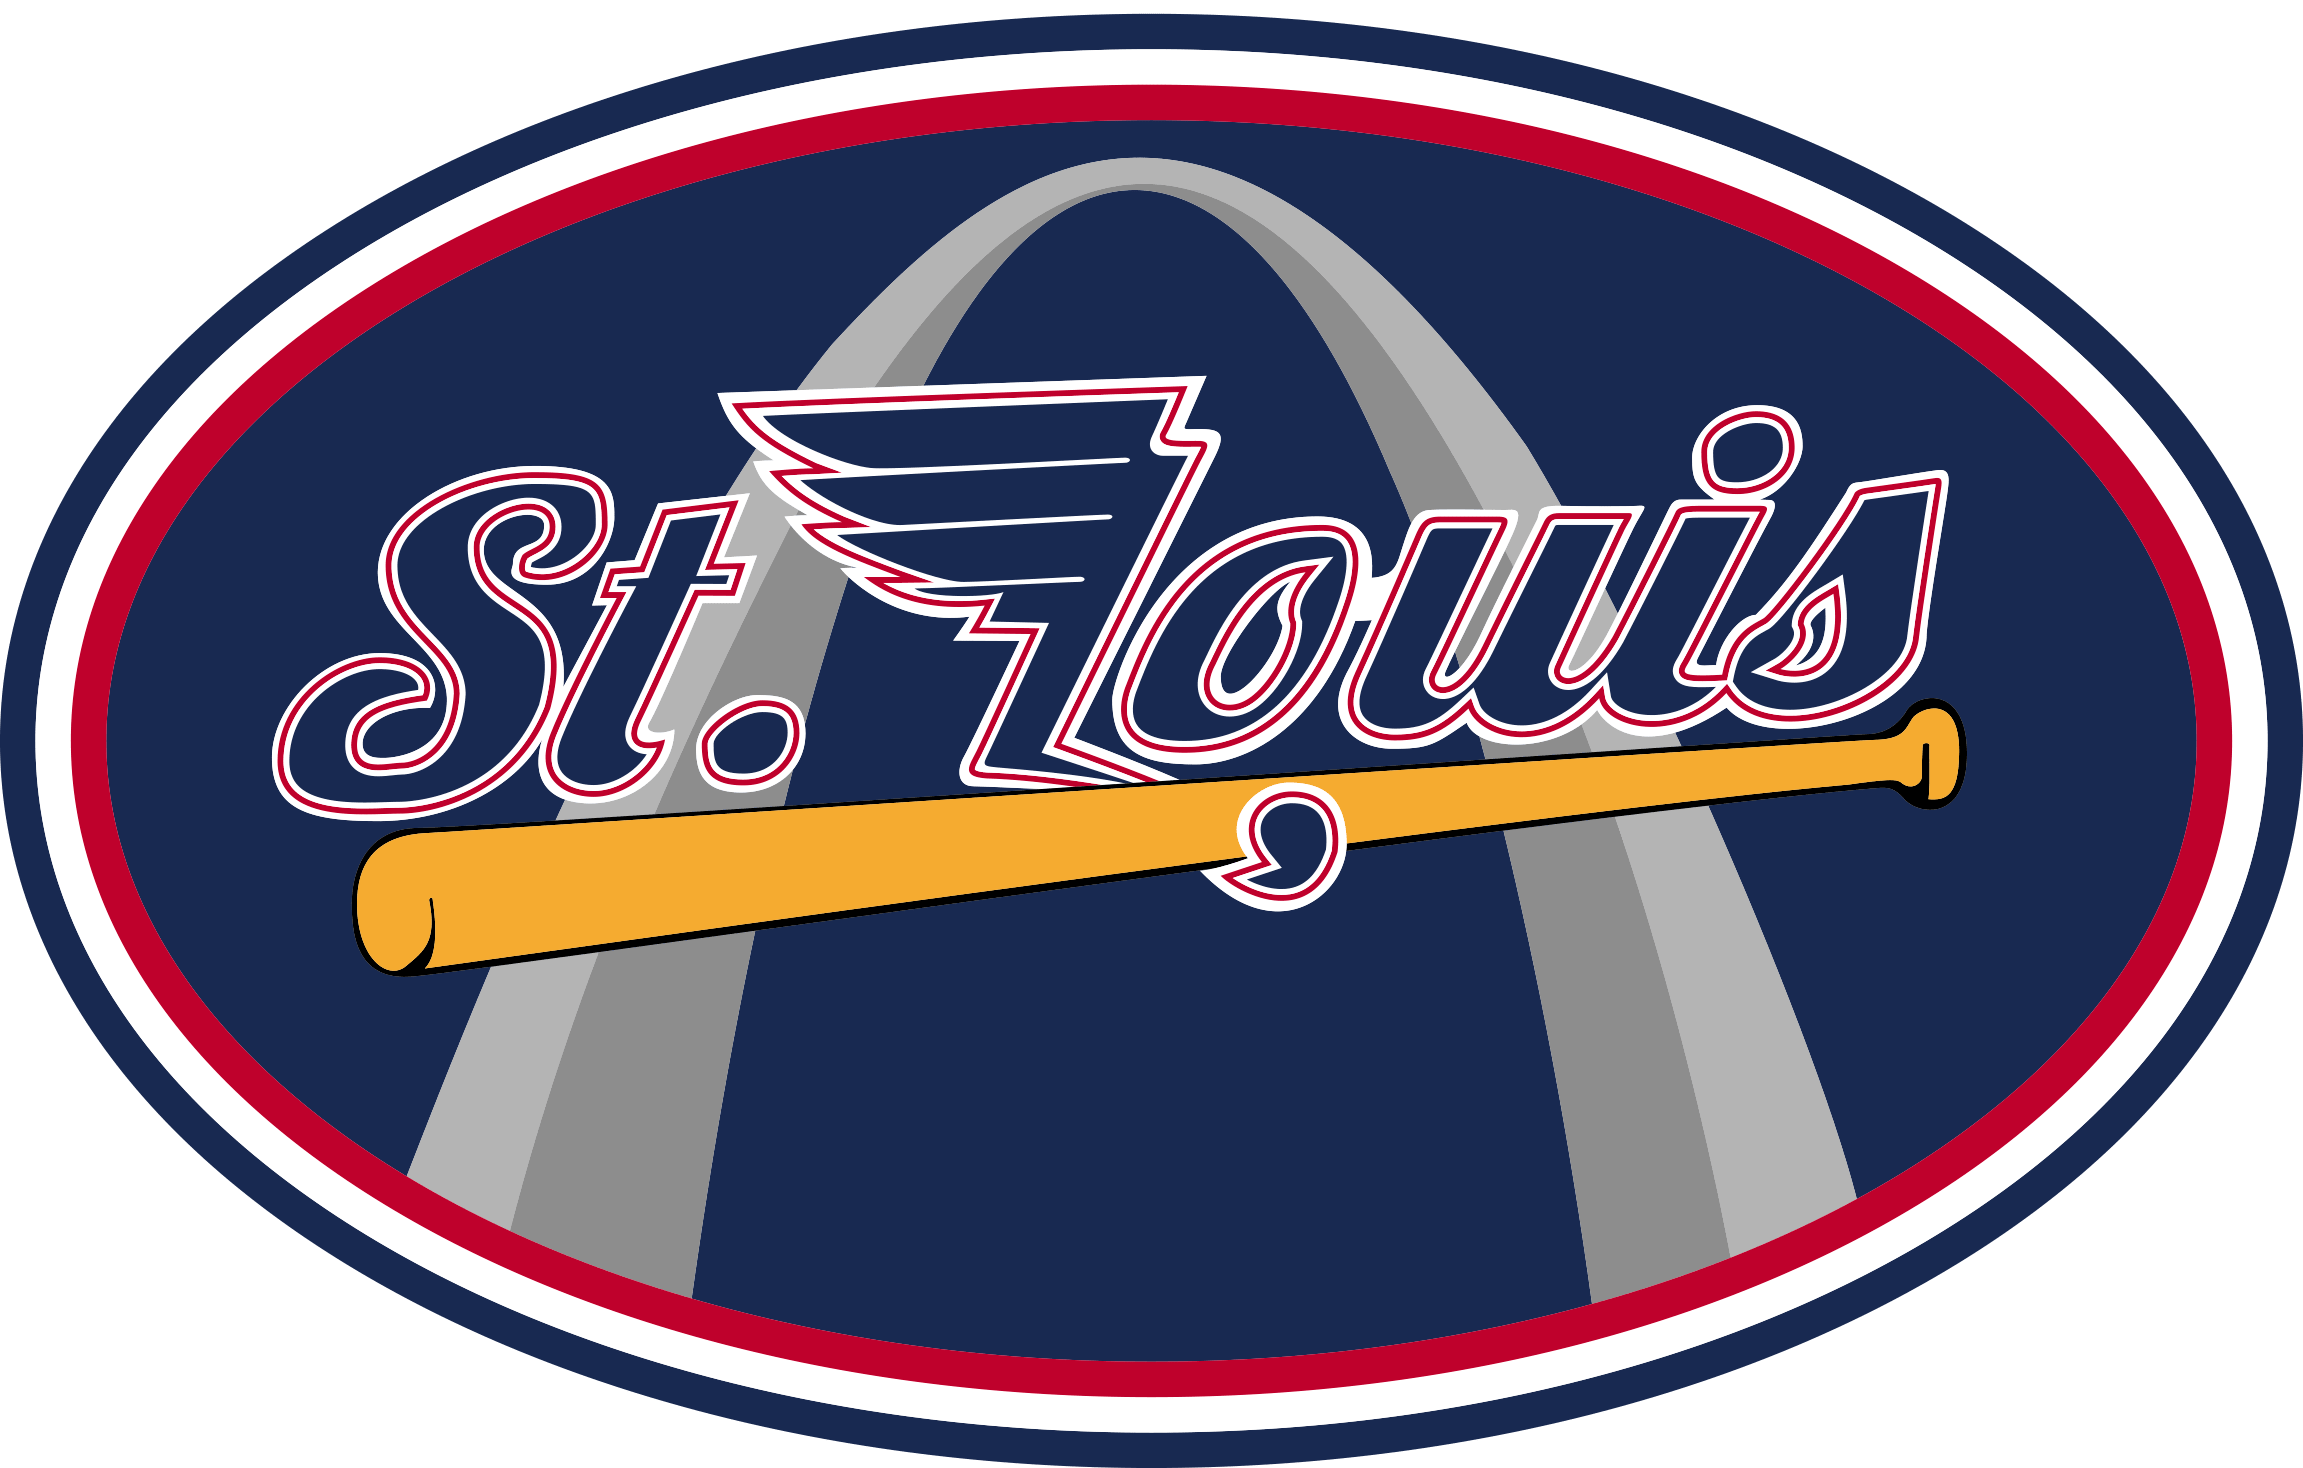 St. Louis Baseball SVG Cutting File Graphic by SVG store